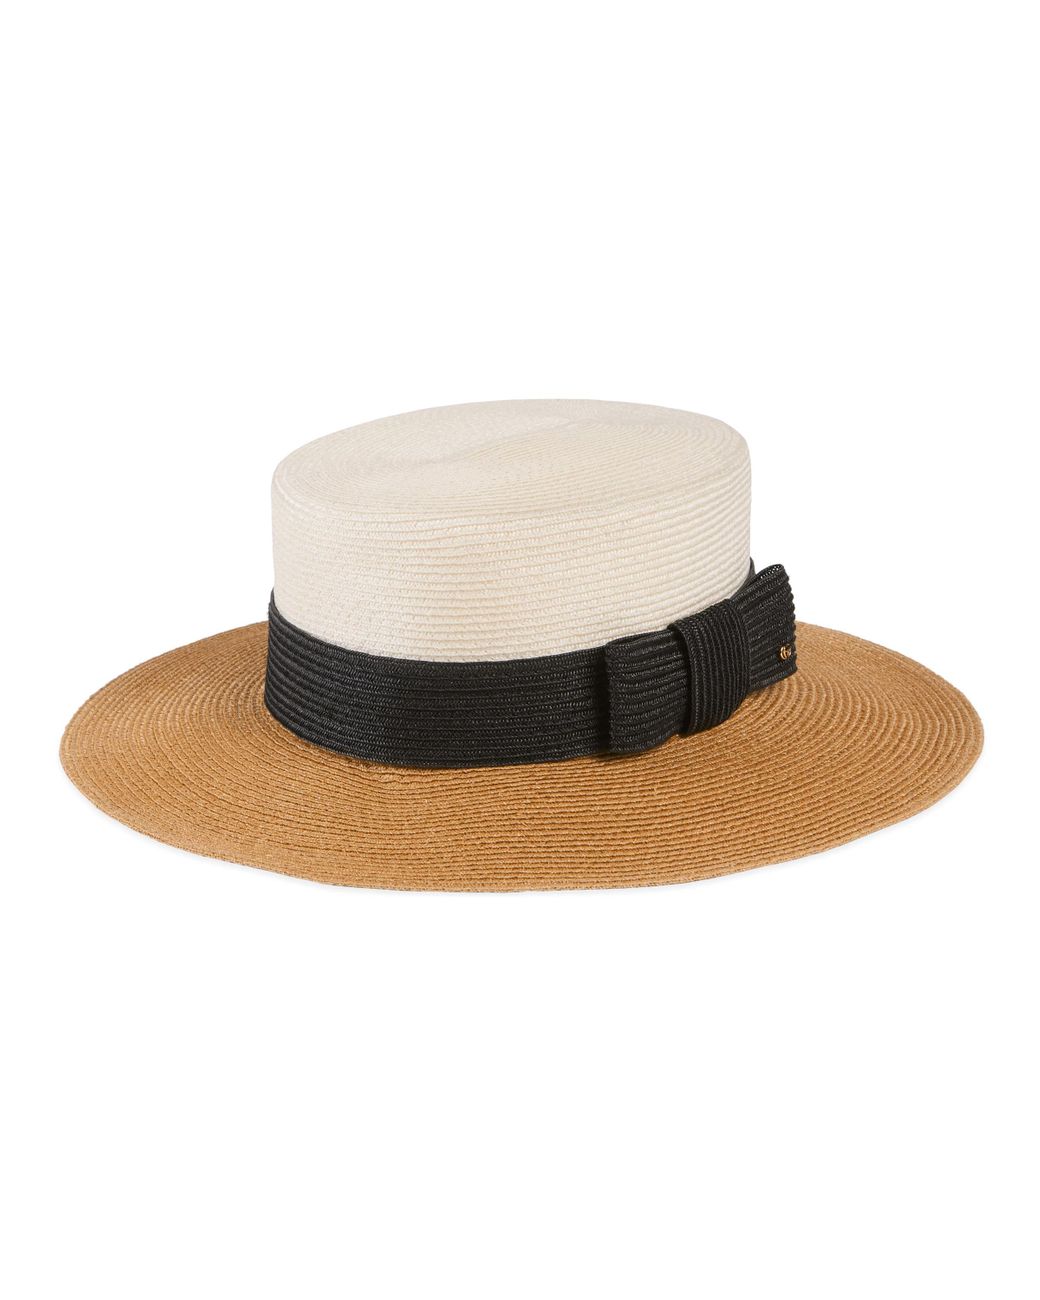 Gucci Straw-effect Wide Brim Hat With Bow in White | Lyst